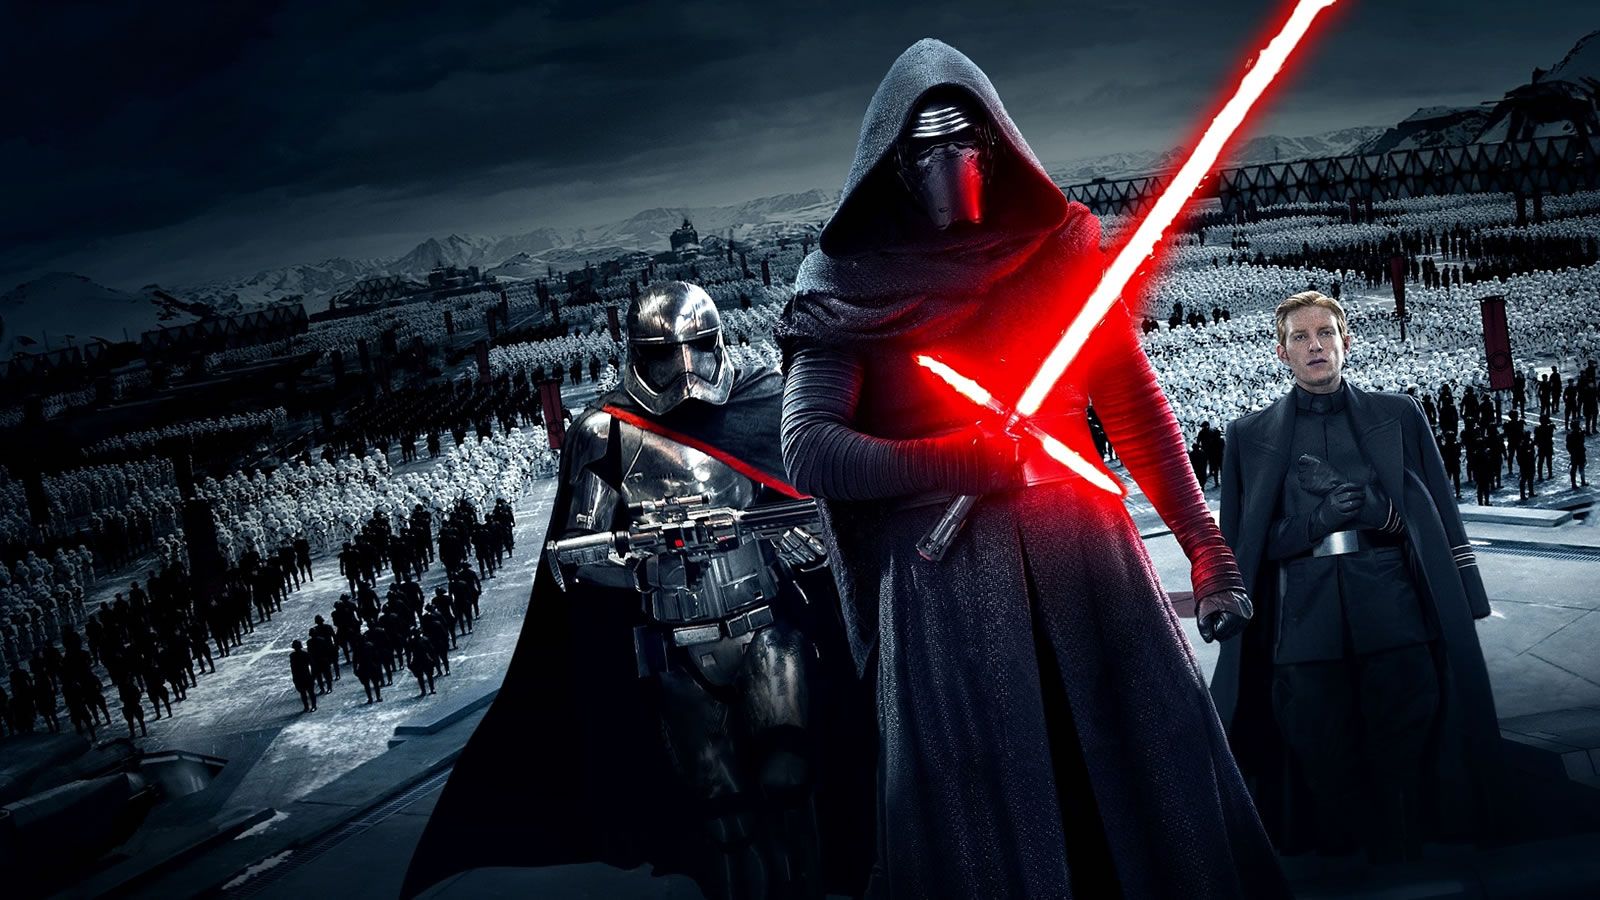 Star Wars The Force Awakens Wallpaper 3 10 News and Updates